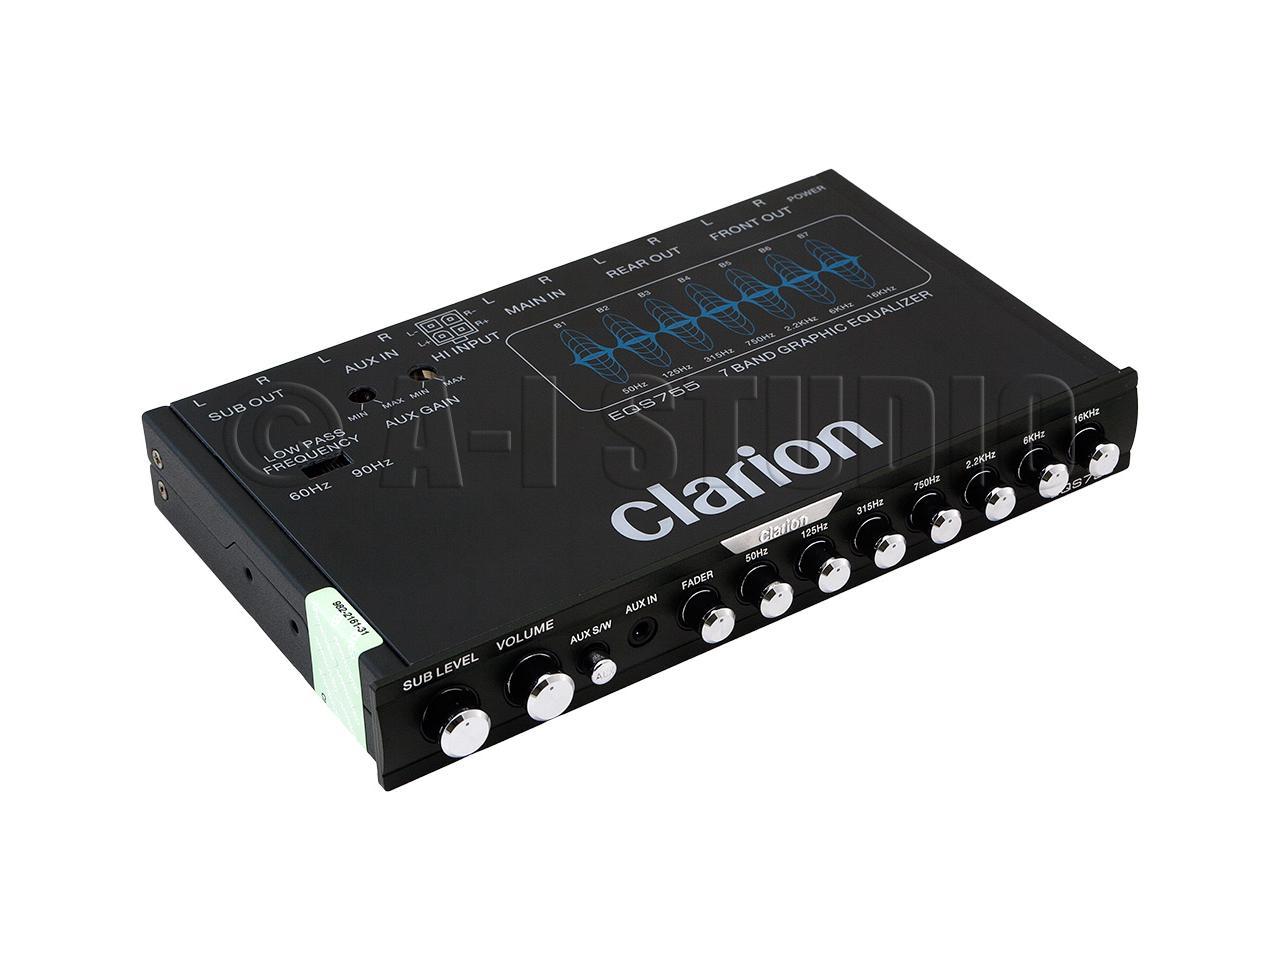 NEW CLARION  EQ EQS755 CAR AUDIO 7-BAND GRAPHIC EQUALIZER WITH 3.5MM RCA AUX-IN